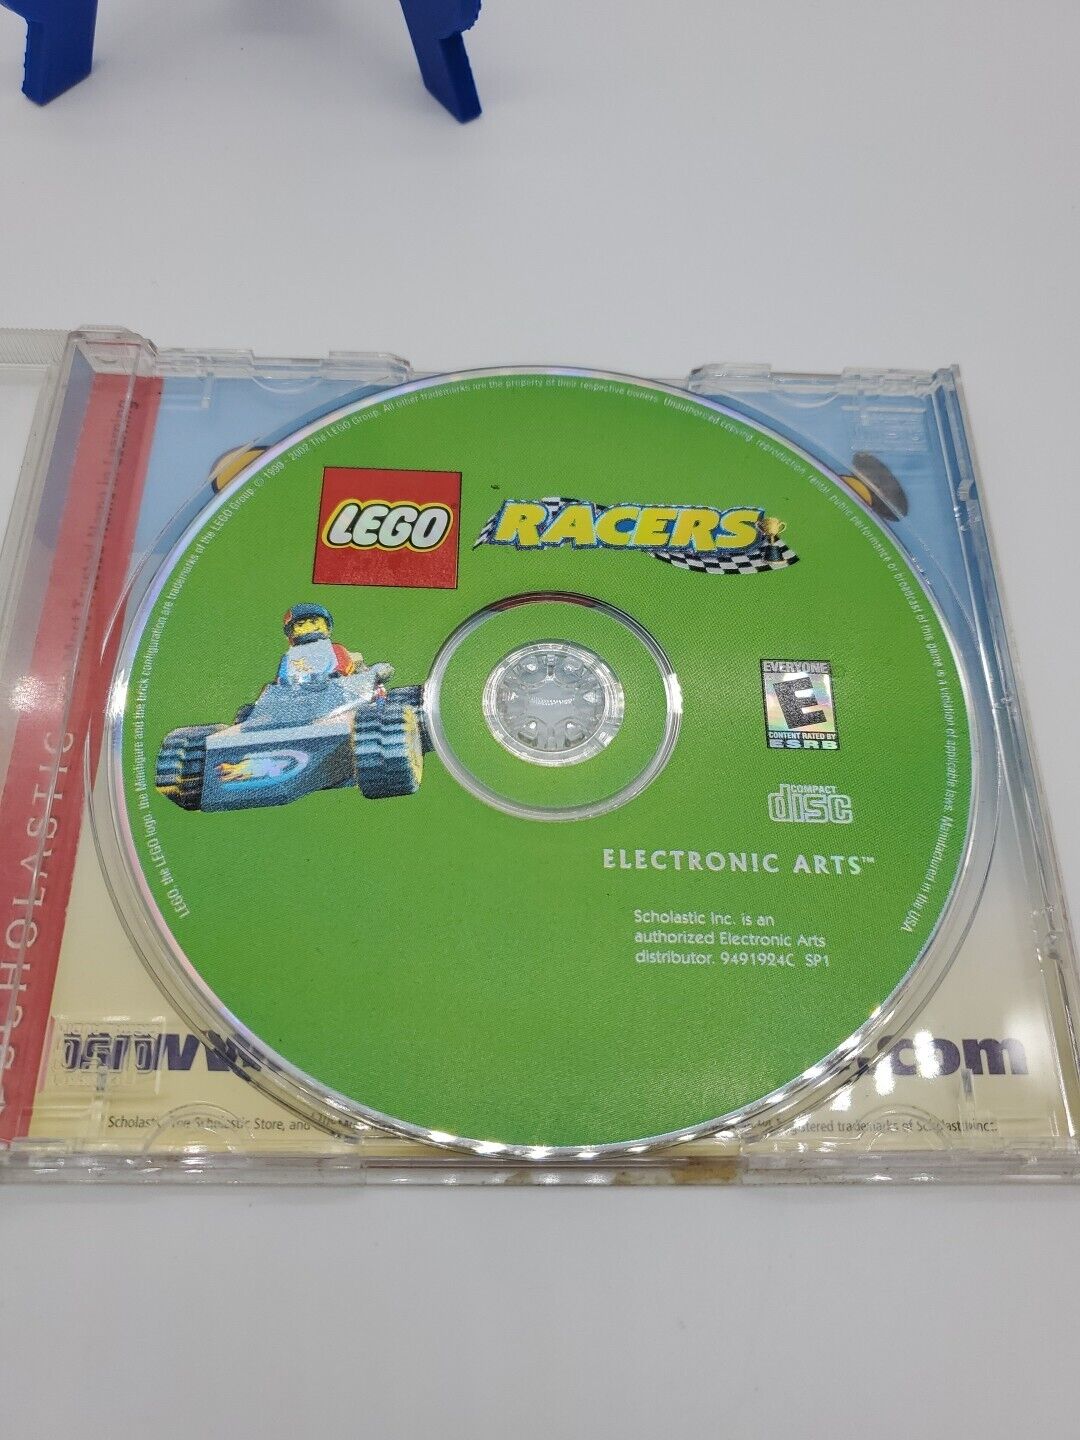 LEGO MASTERPIECE RACERS CD-ROM BY SCHOLASTIC 1999-2000, ELECTRONIC